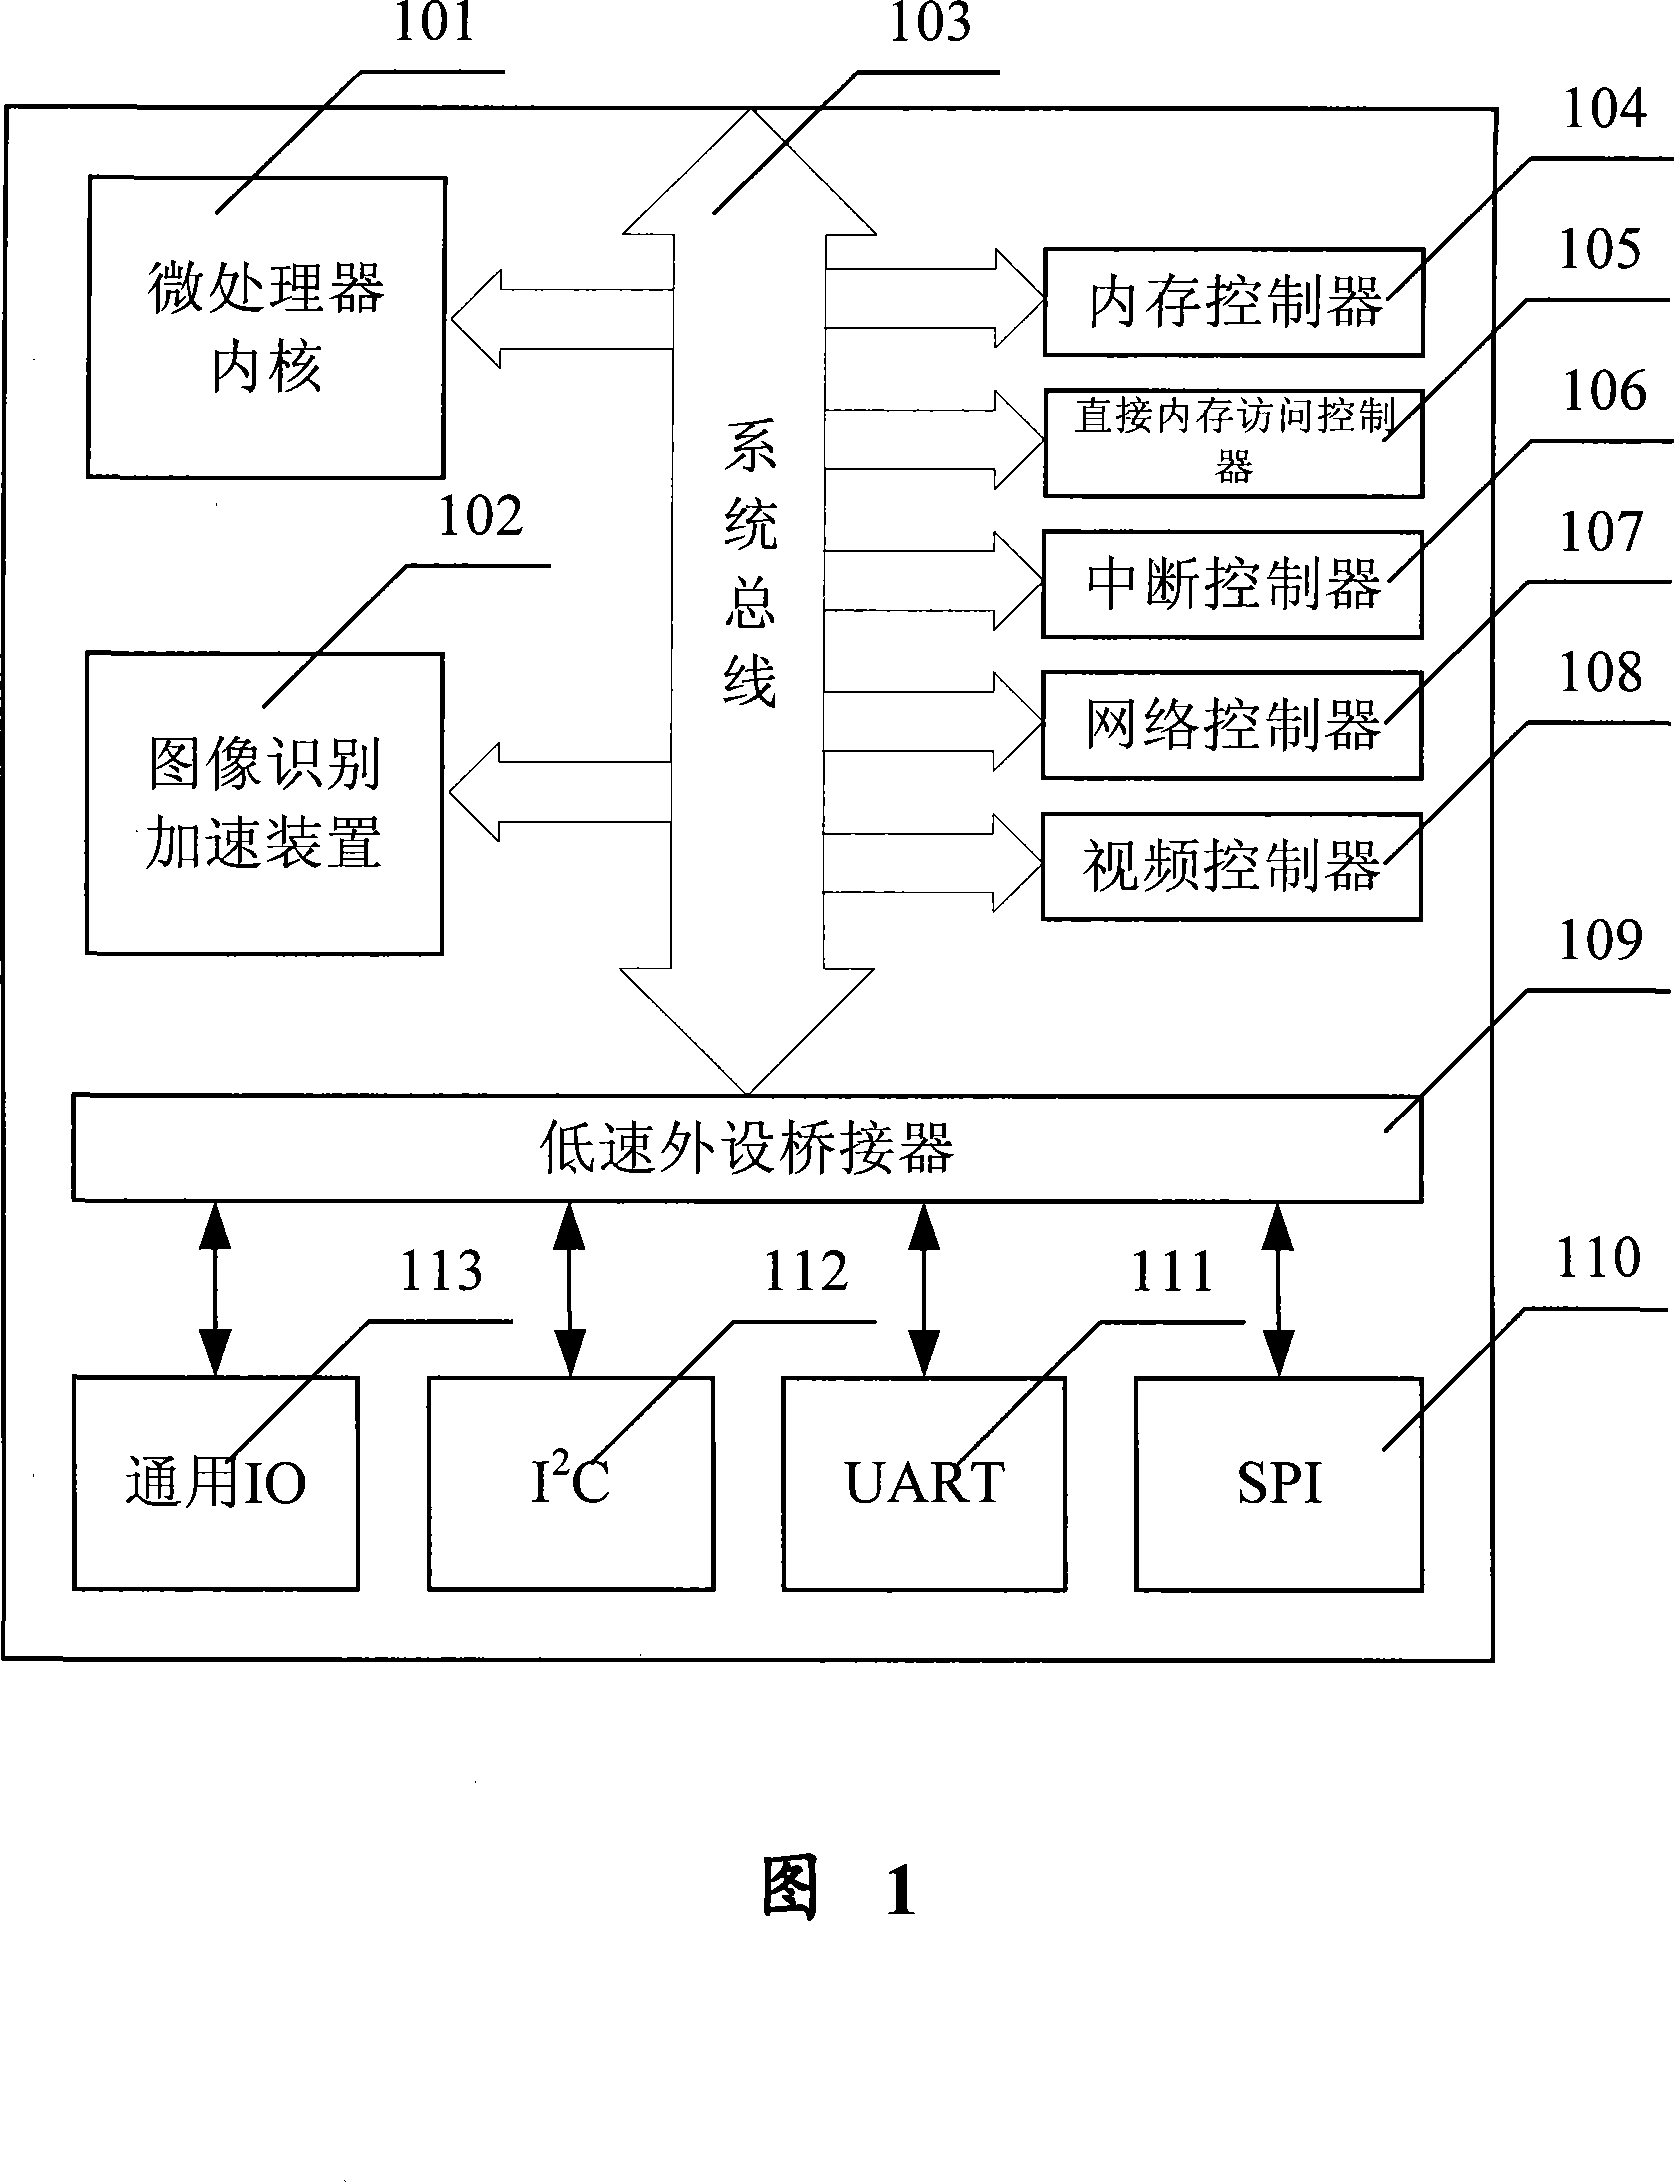 Image recognition accelerator and MPU chip possessing image recognition accelerator